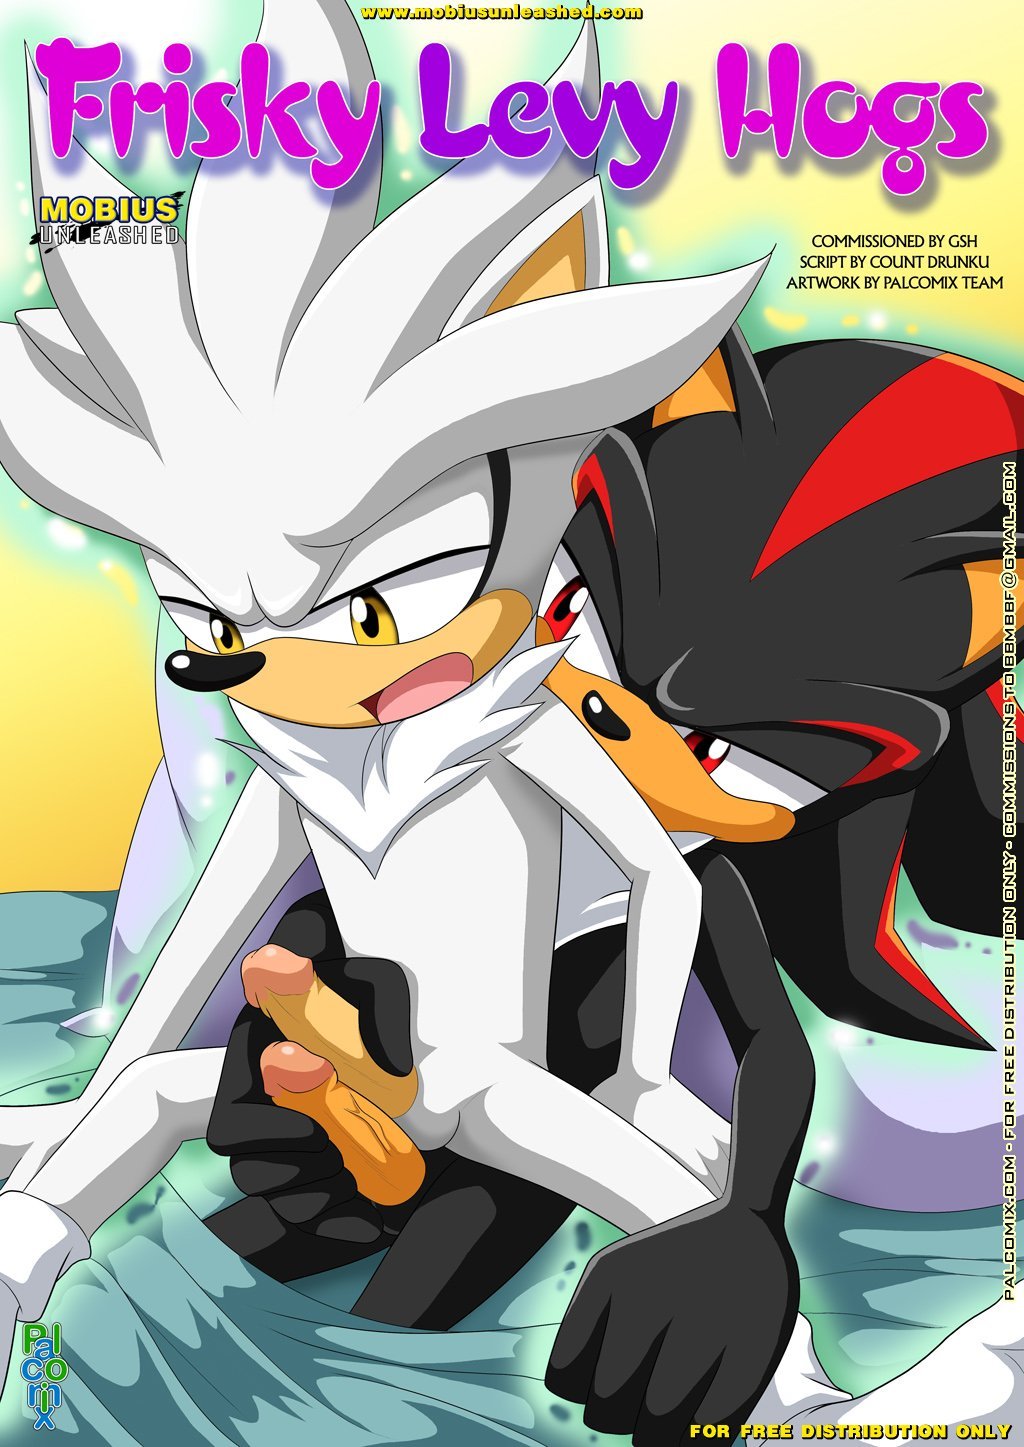 Wind reccomend sexy naked gay shadow the hedgehog